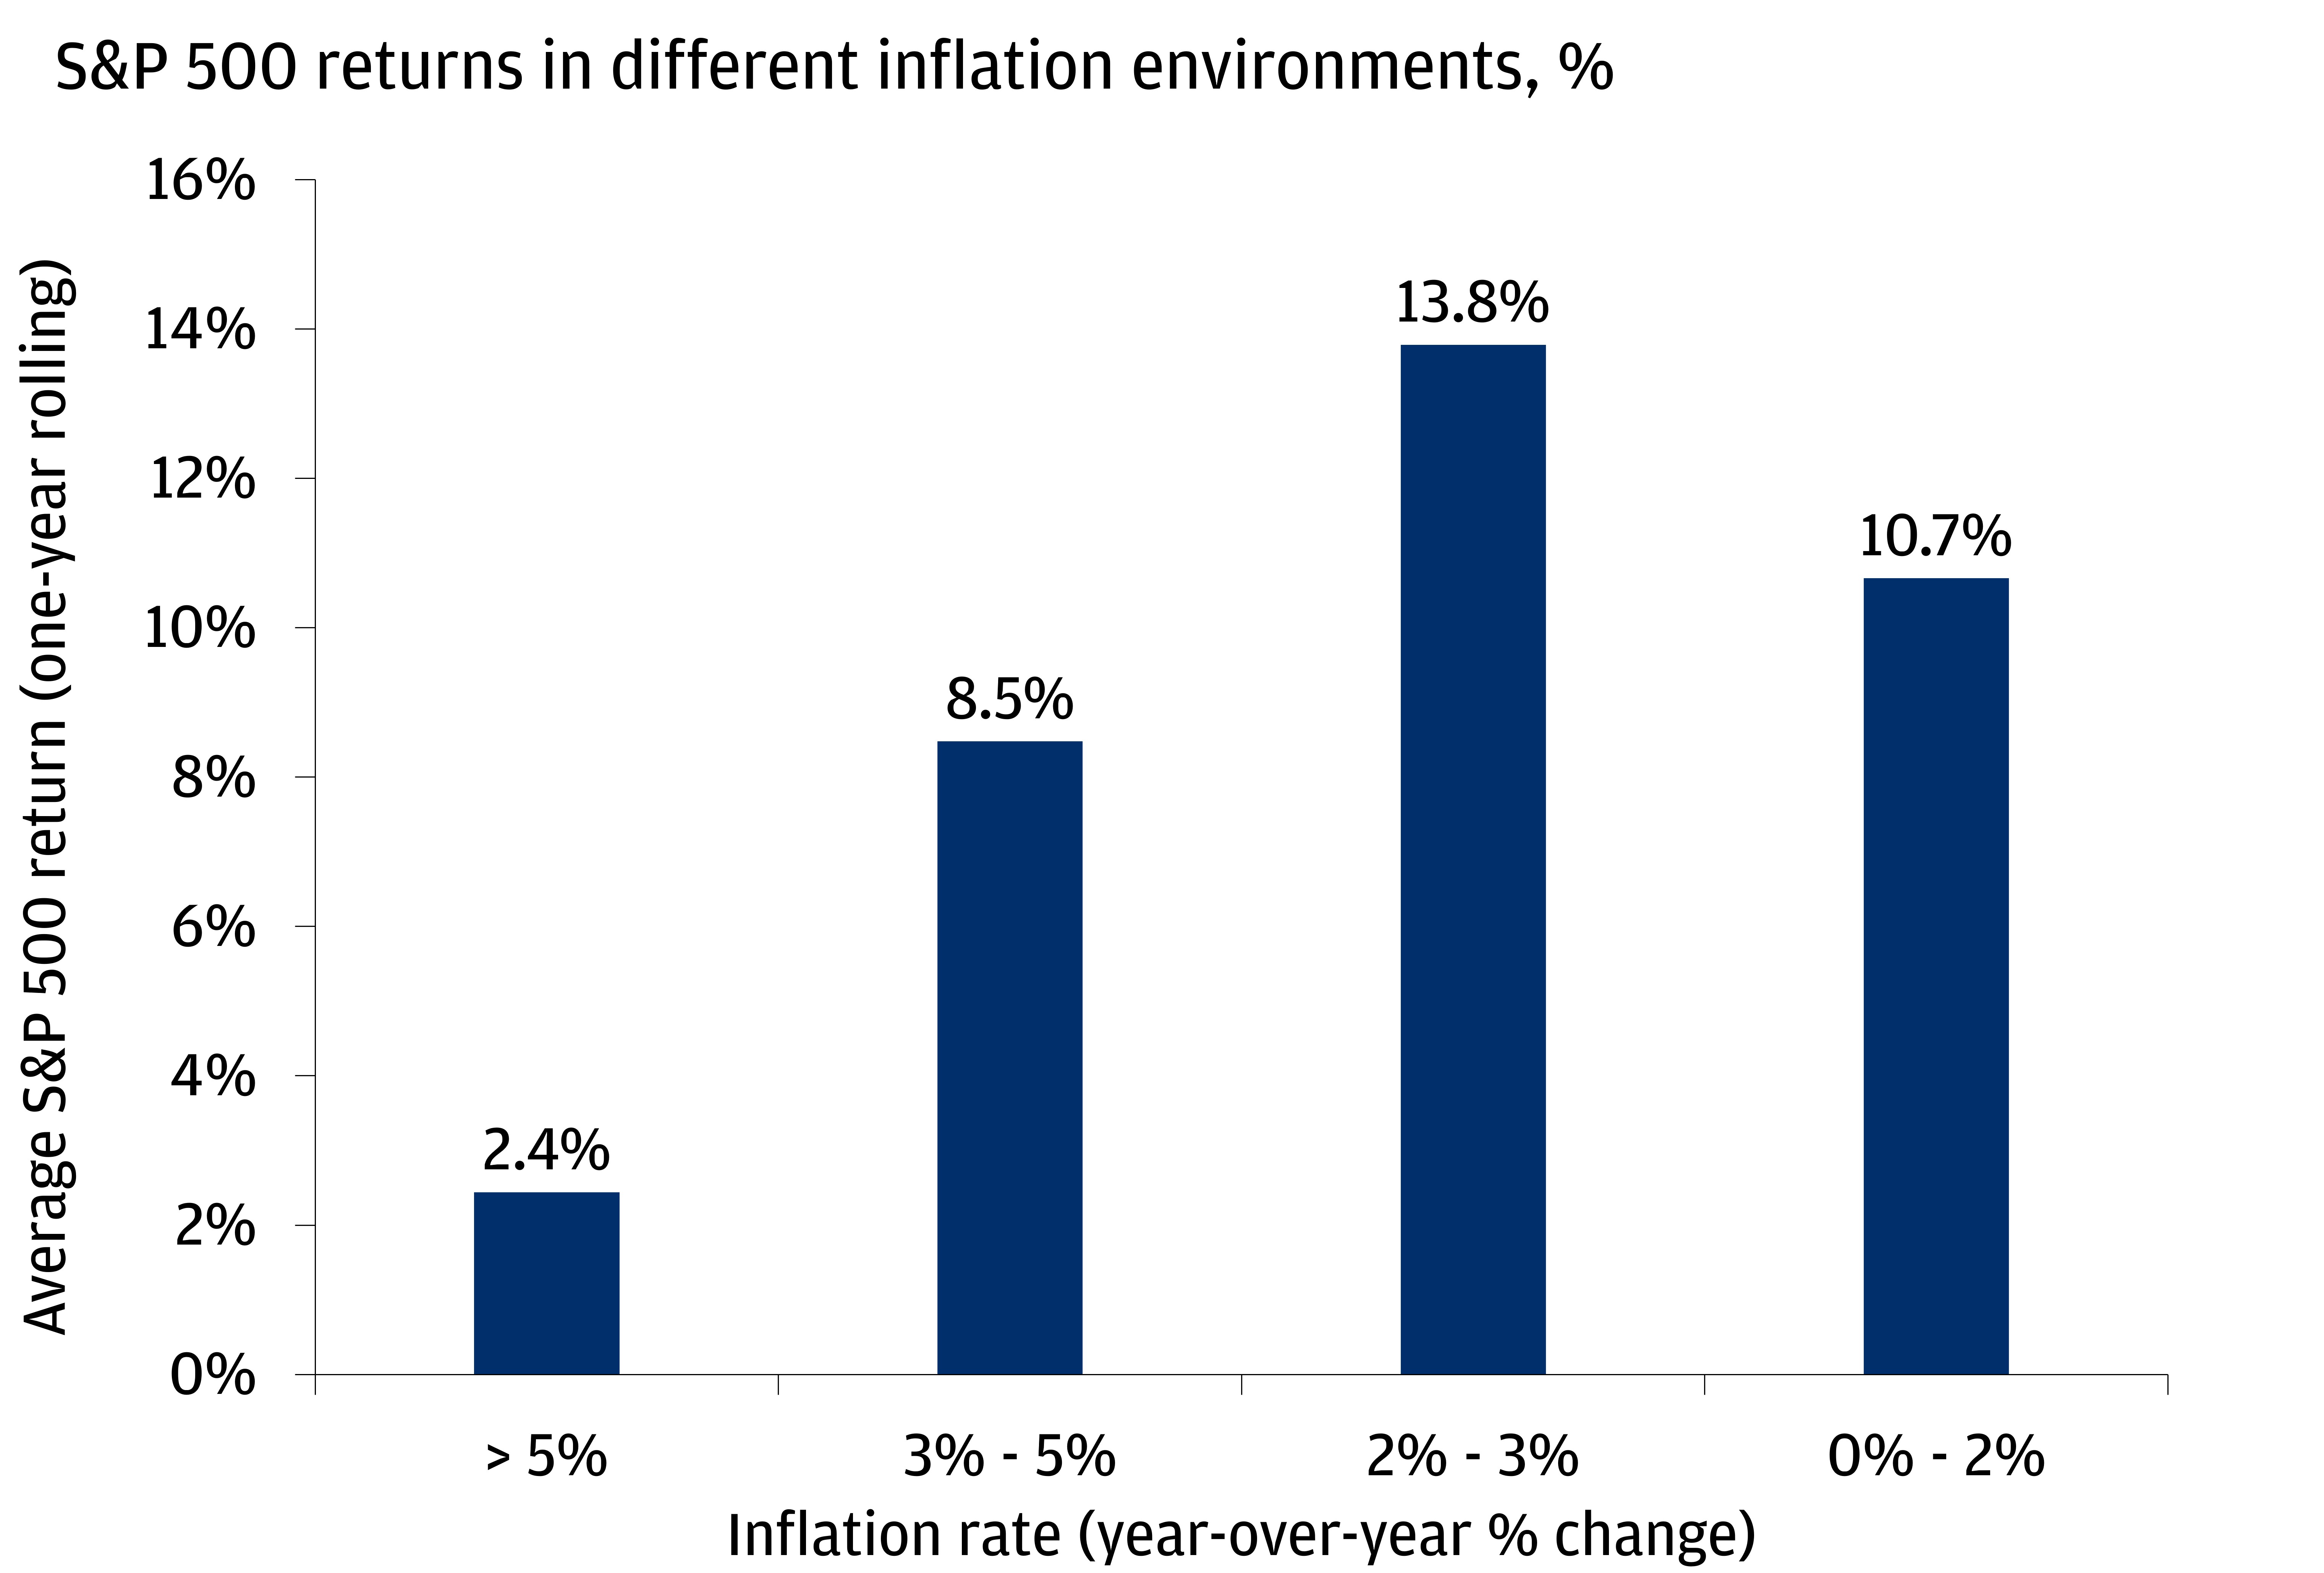 This column chart shows S&P 500 YoY returns in different inflation environments. 